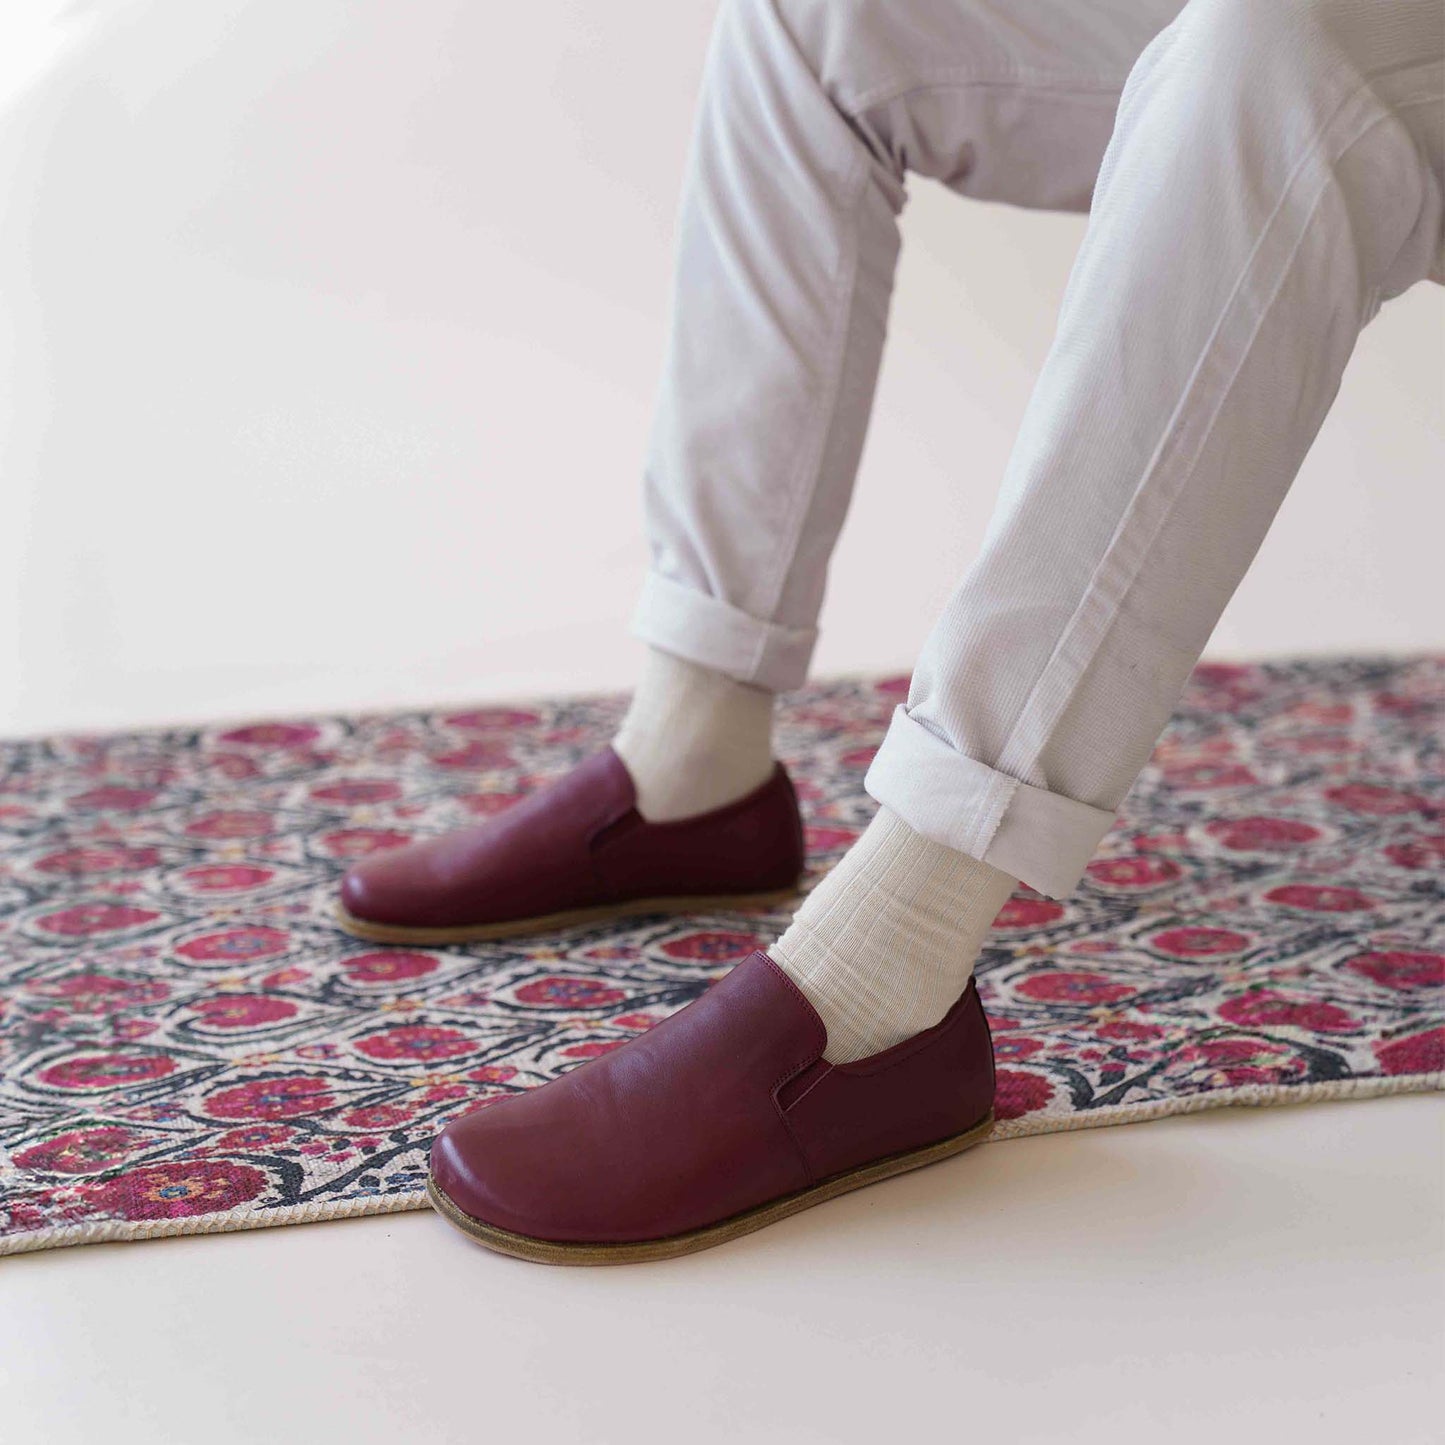 Close-up of a man sitting on a rug wearing Ionia Leather Barefoot Men Loafers in Burgundy, showcasing their flexibility and comfort.